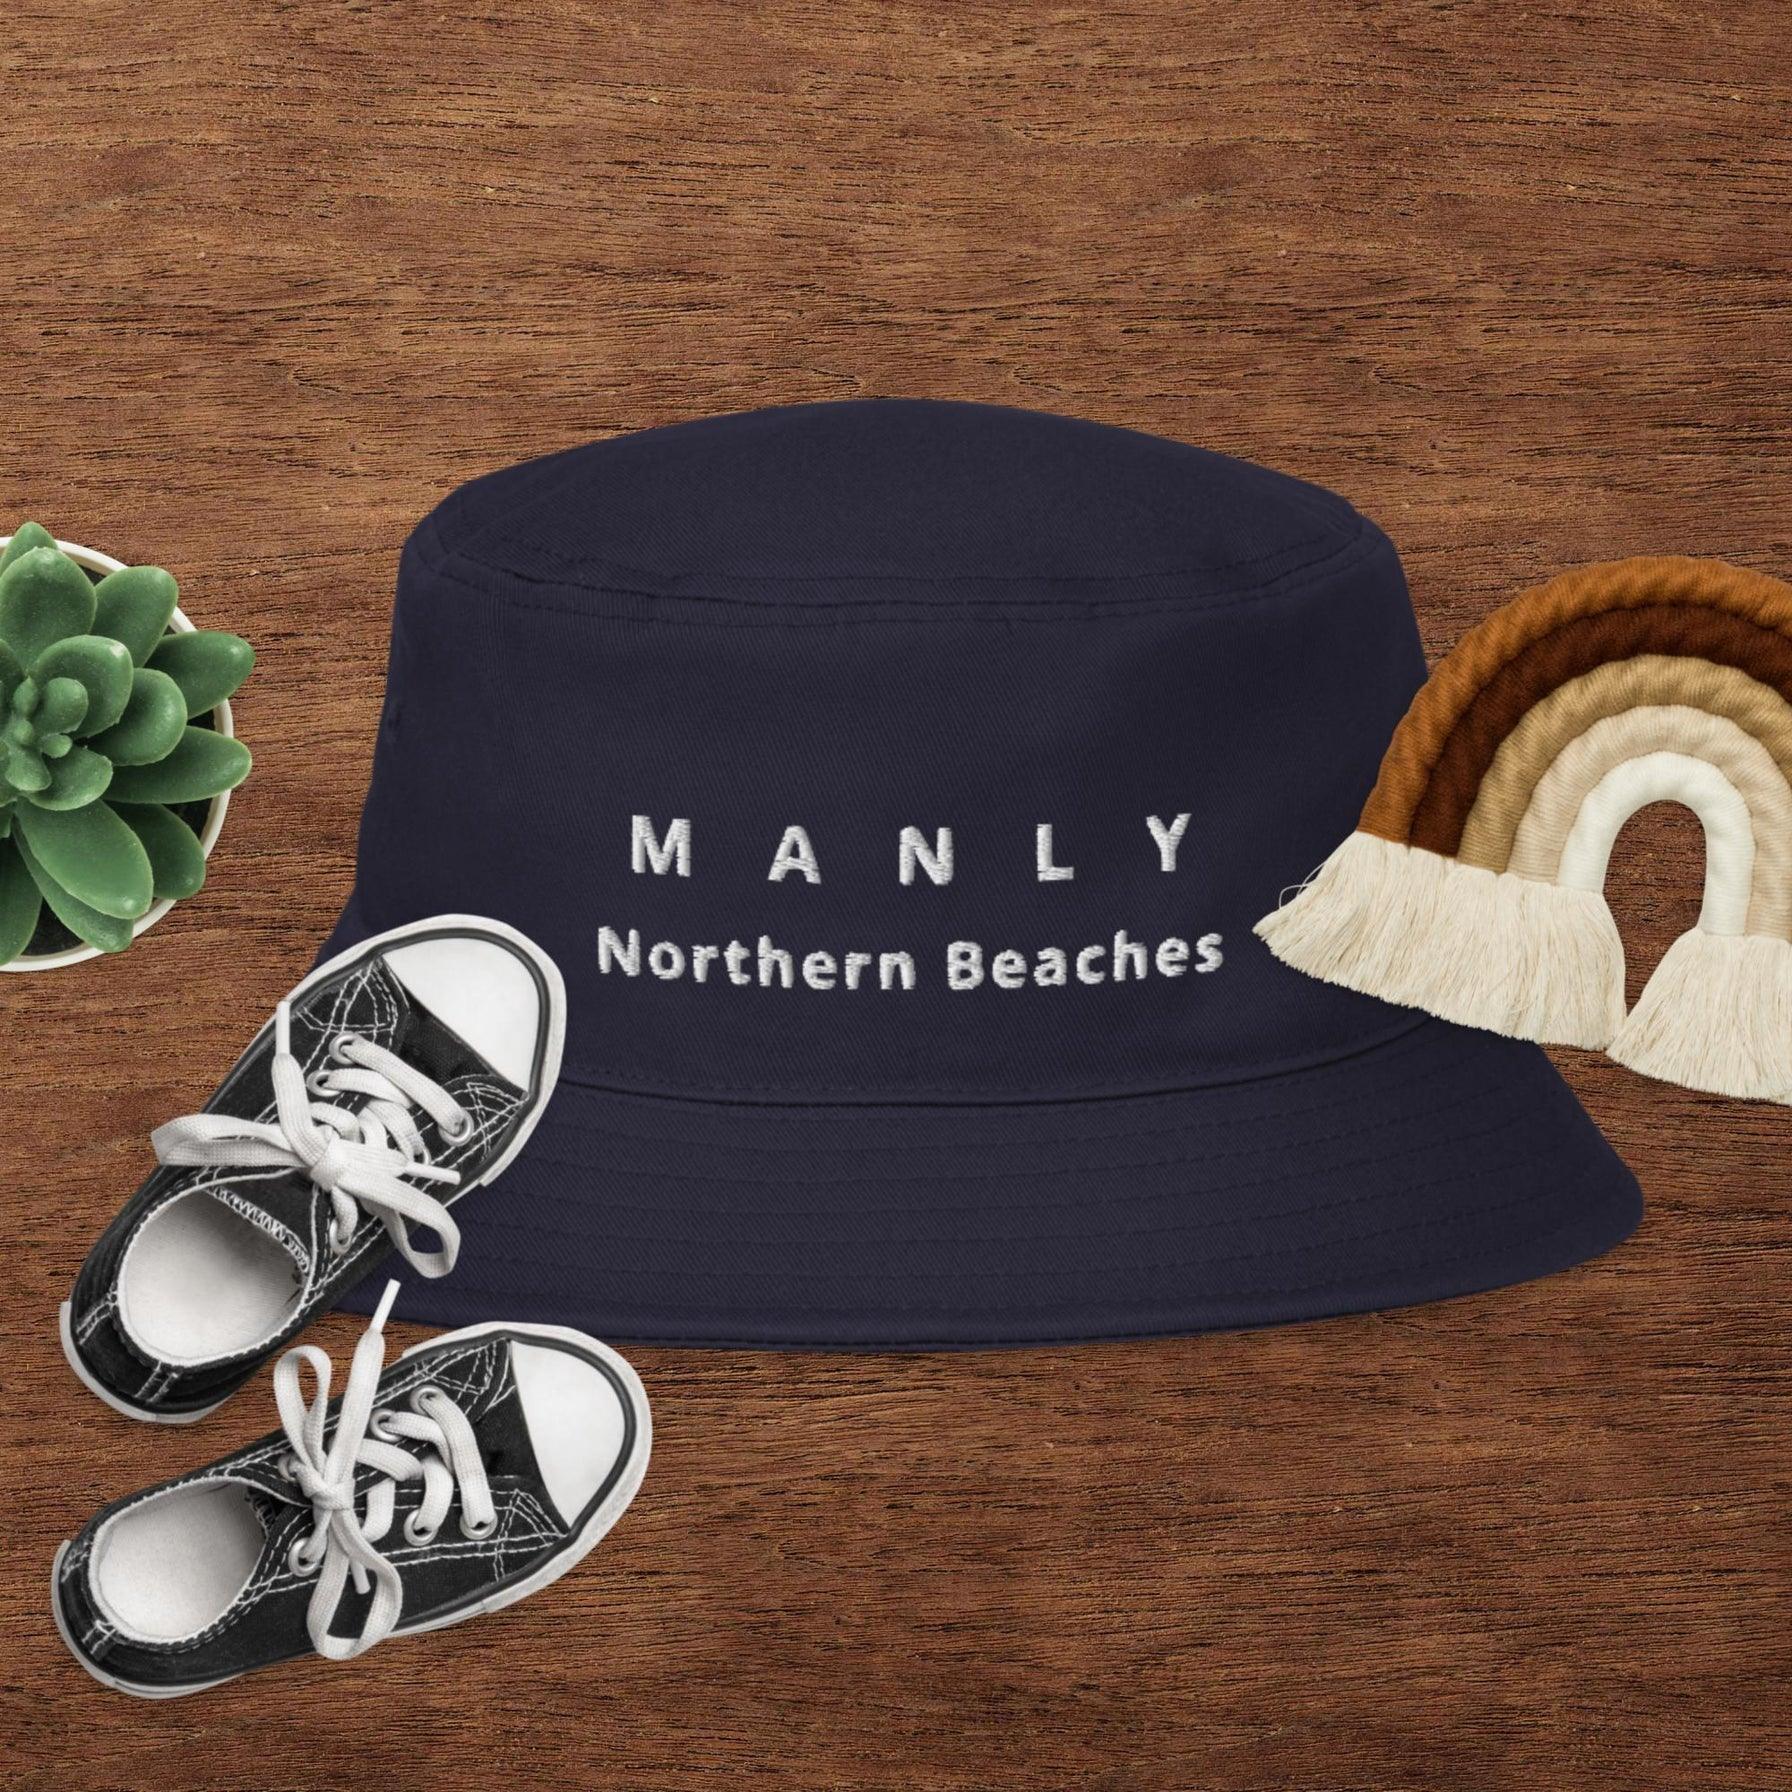 Hats with customised logo designs - Lost Manly Shop